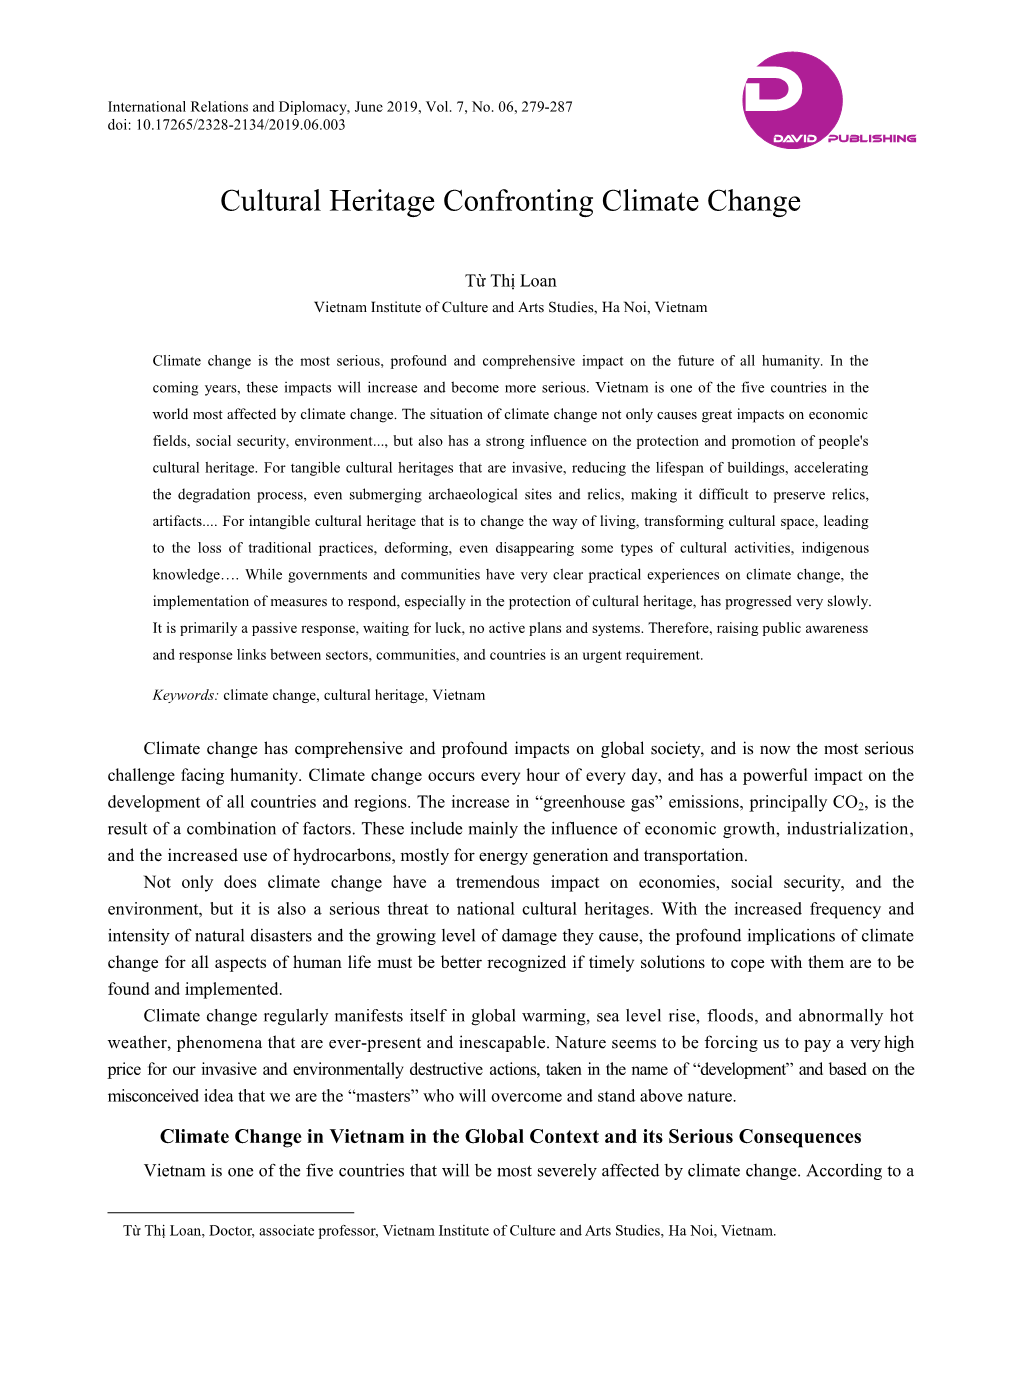 Cultural Heritage Confronting Climate Change